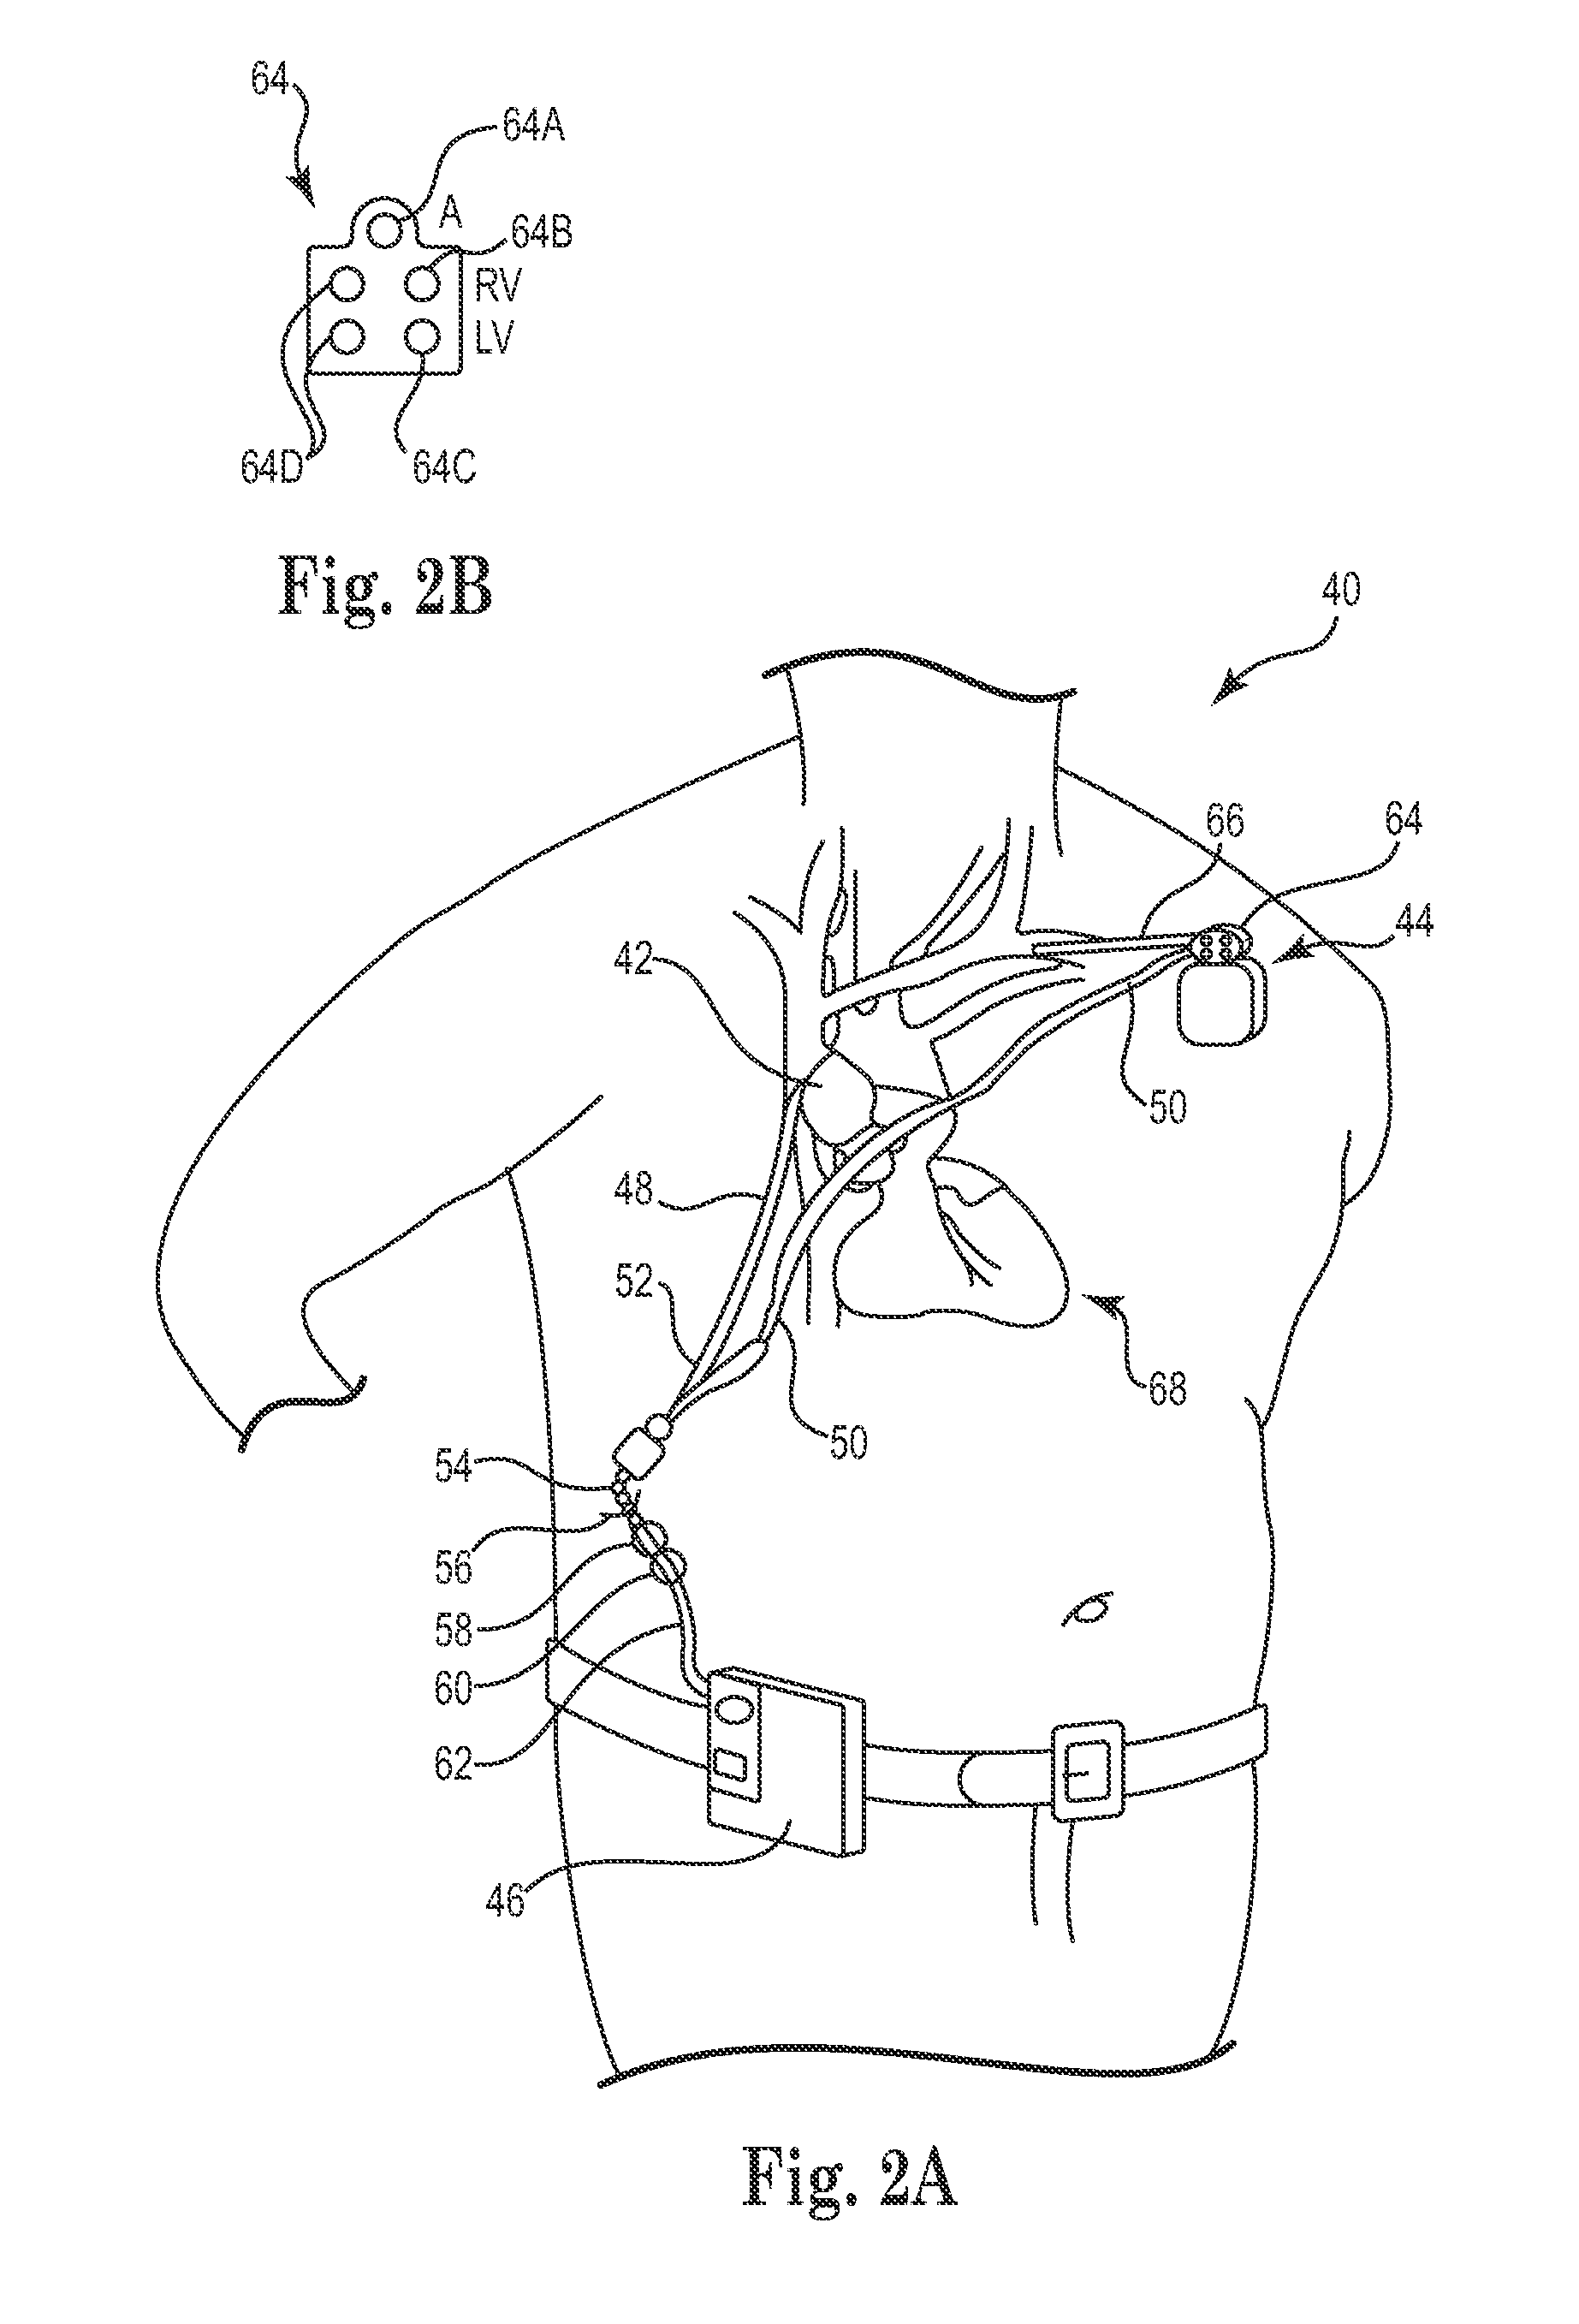 Combination Heart Assist Systems, Methods, and Devices